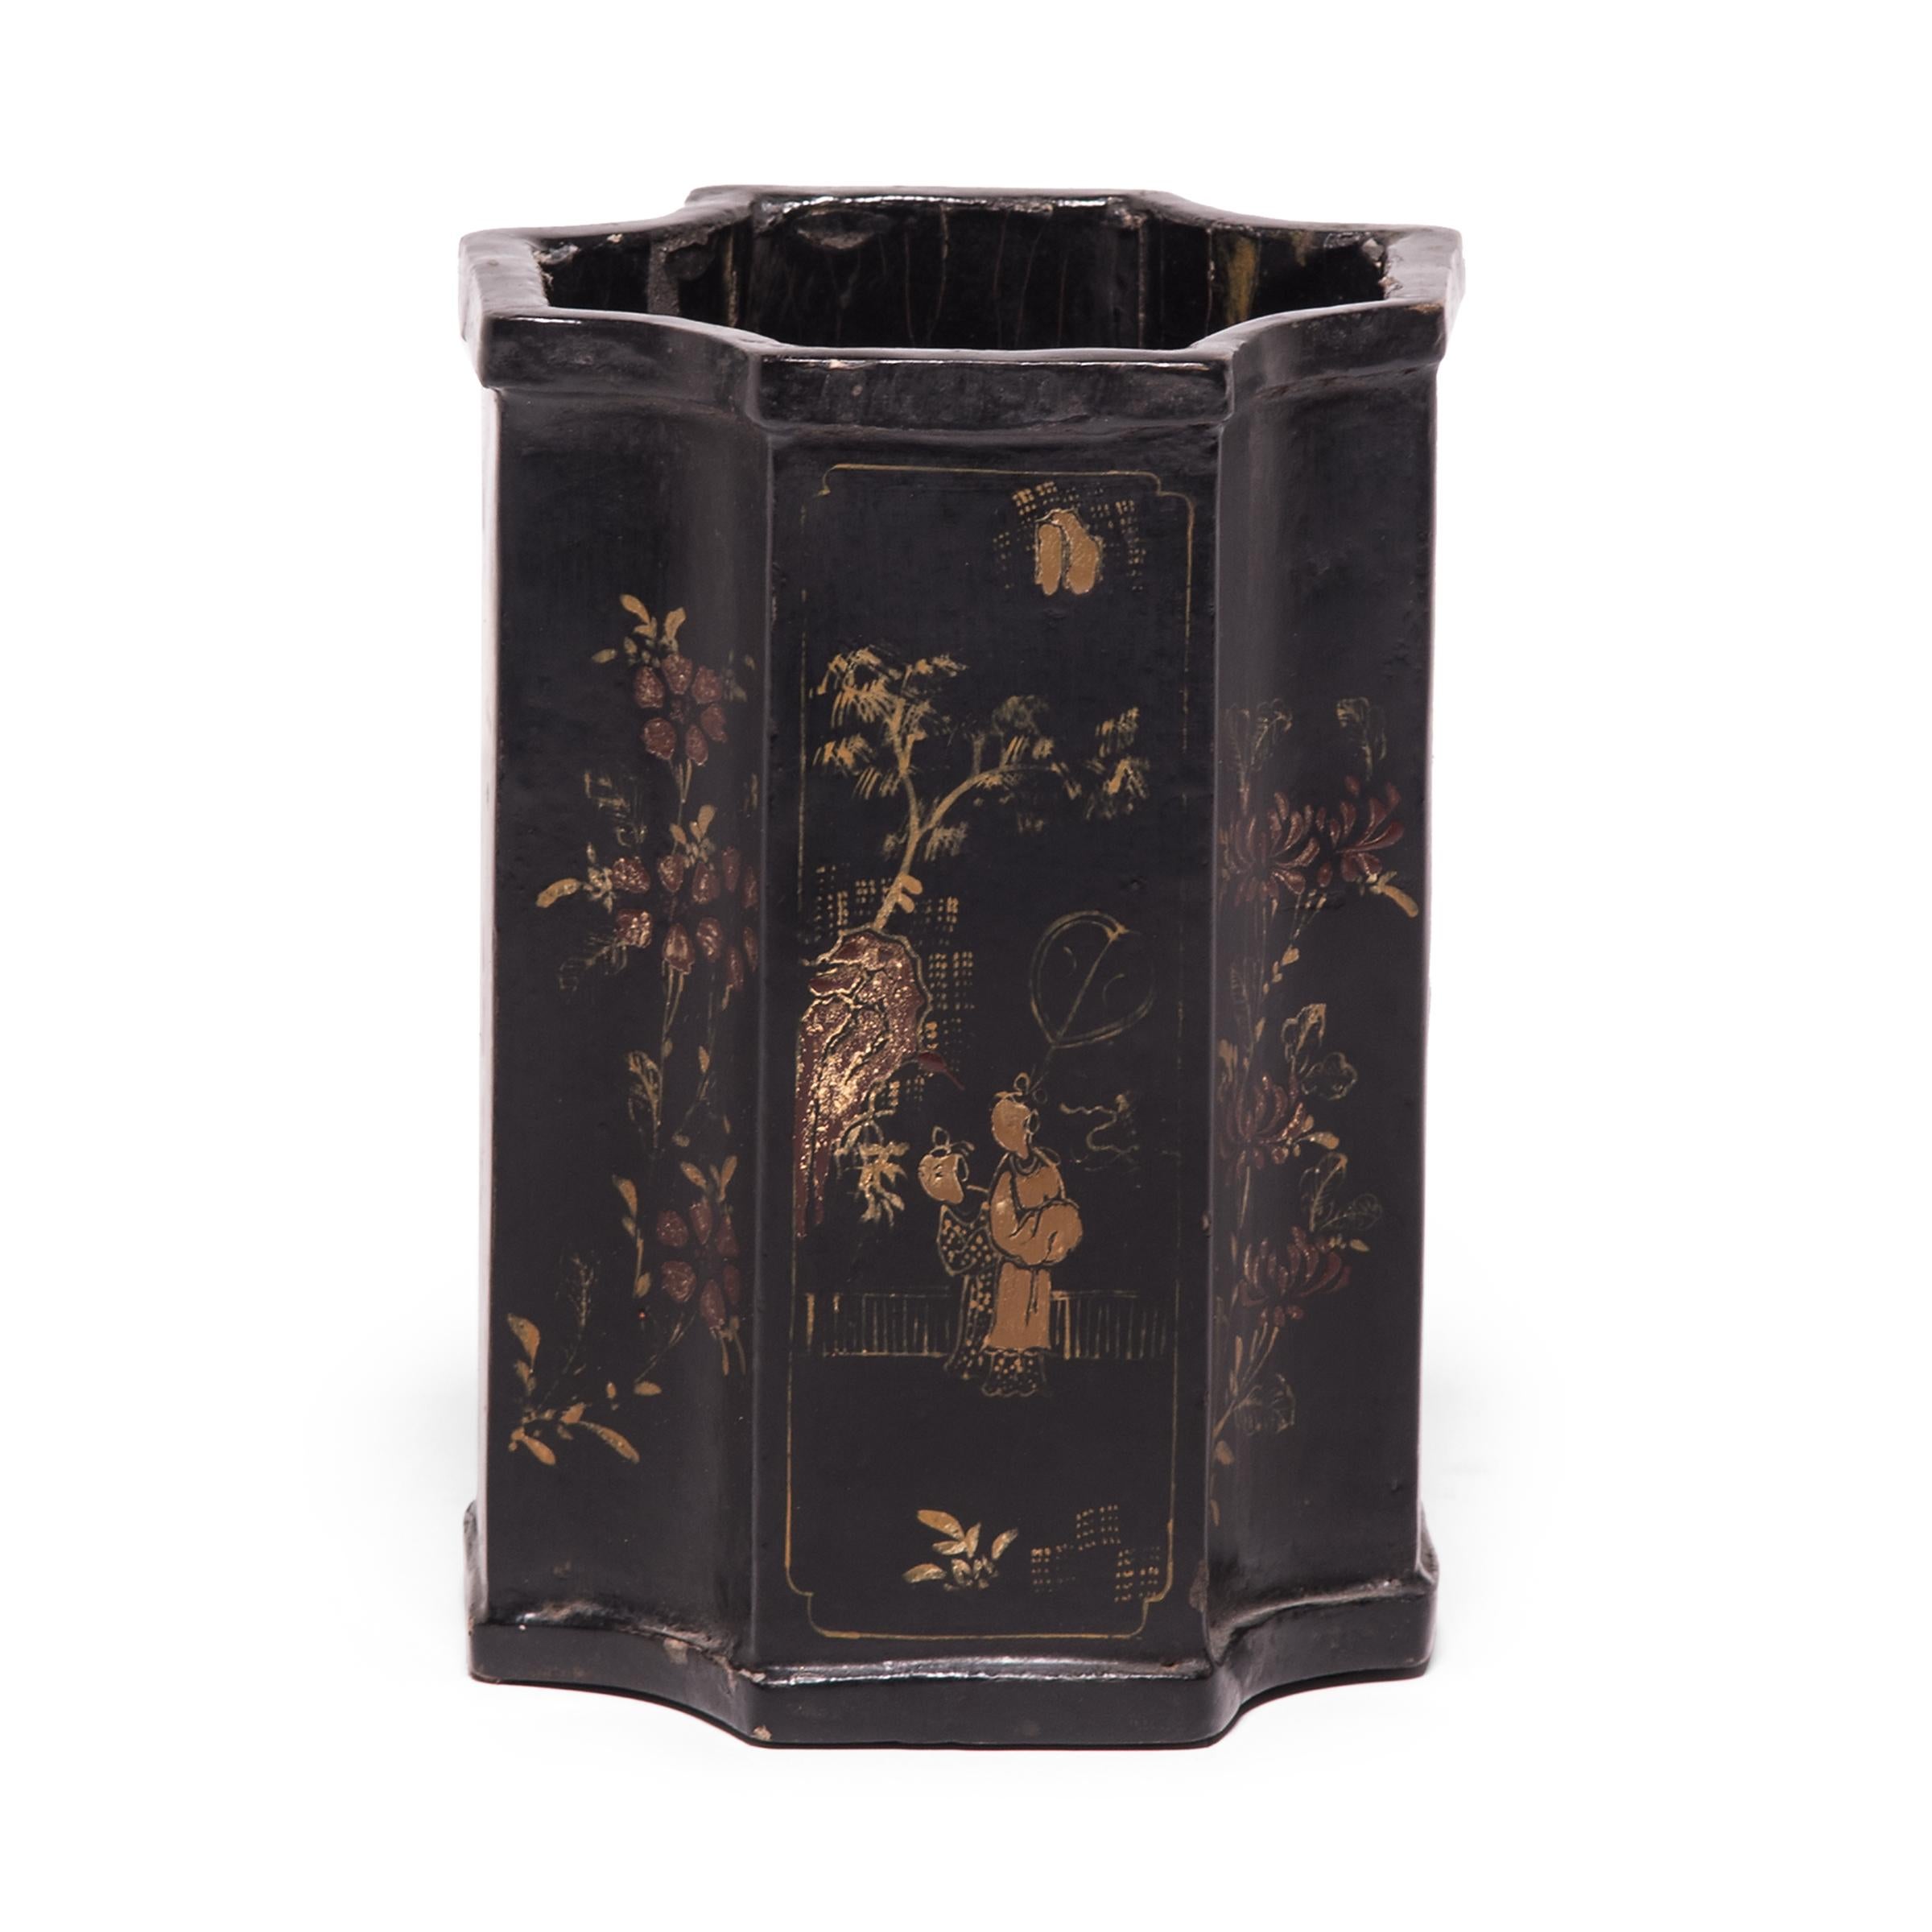 This black lacquered brush pot, which was an essential fixture of a scholar's studio, is hand painted with alternating depictions of garden scenes and flower motifs. These ornate gilt paintings have mellowed beautifully, revealing a depth of